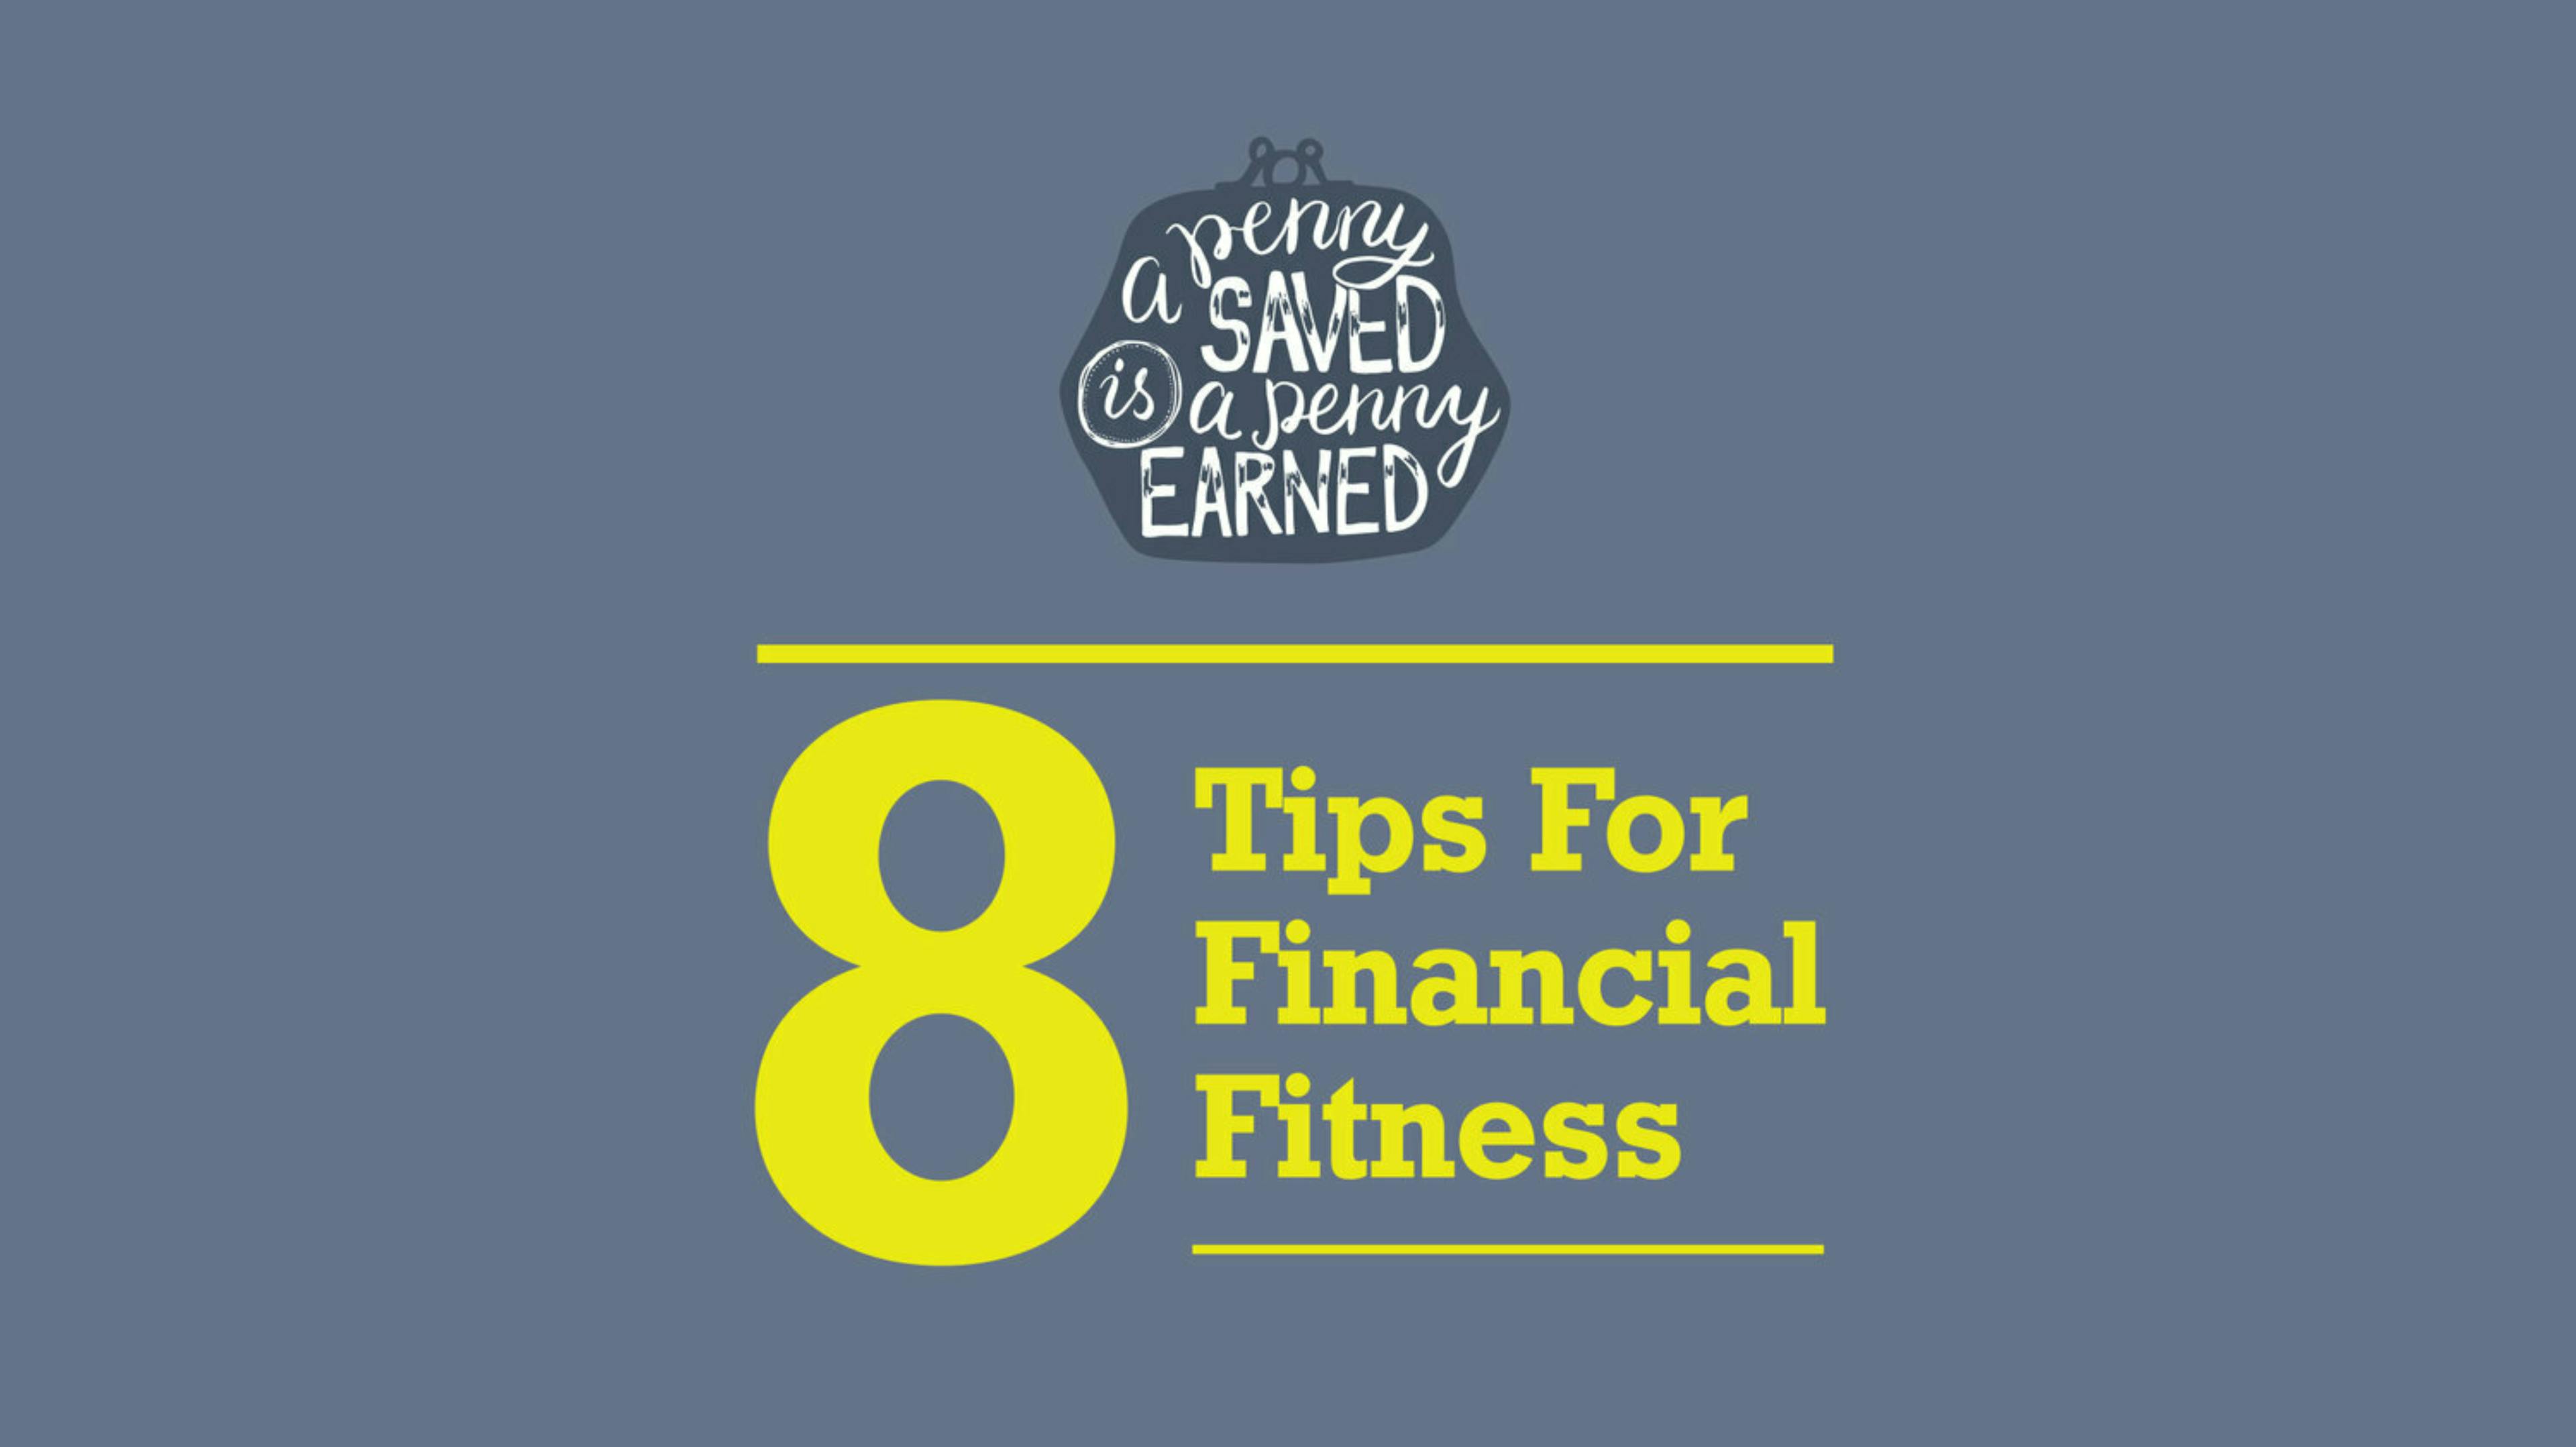 A Penny Saved Is A Penny Earned: 8 Tips For Financial Fitness